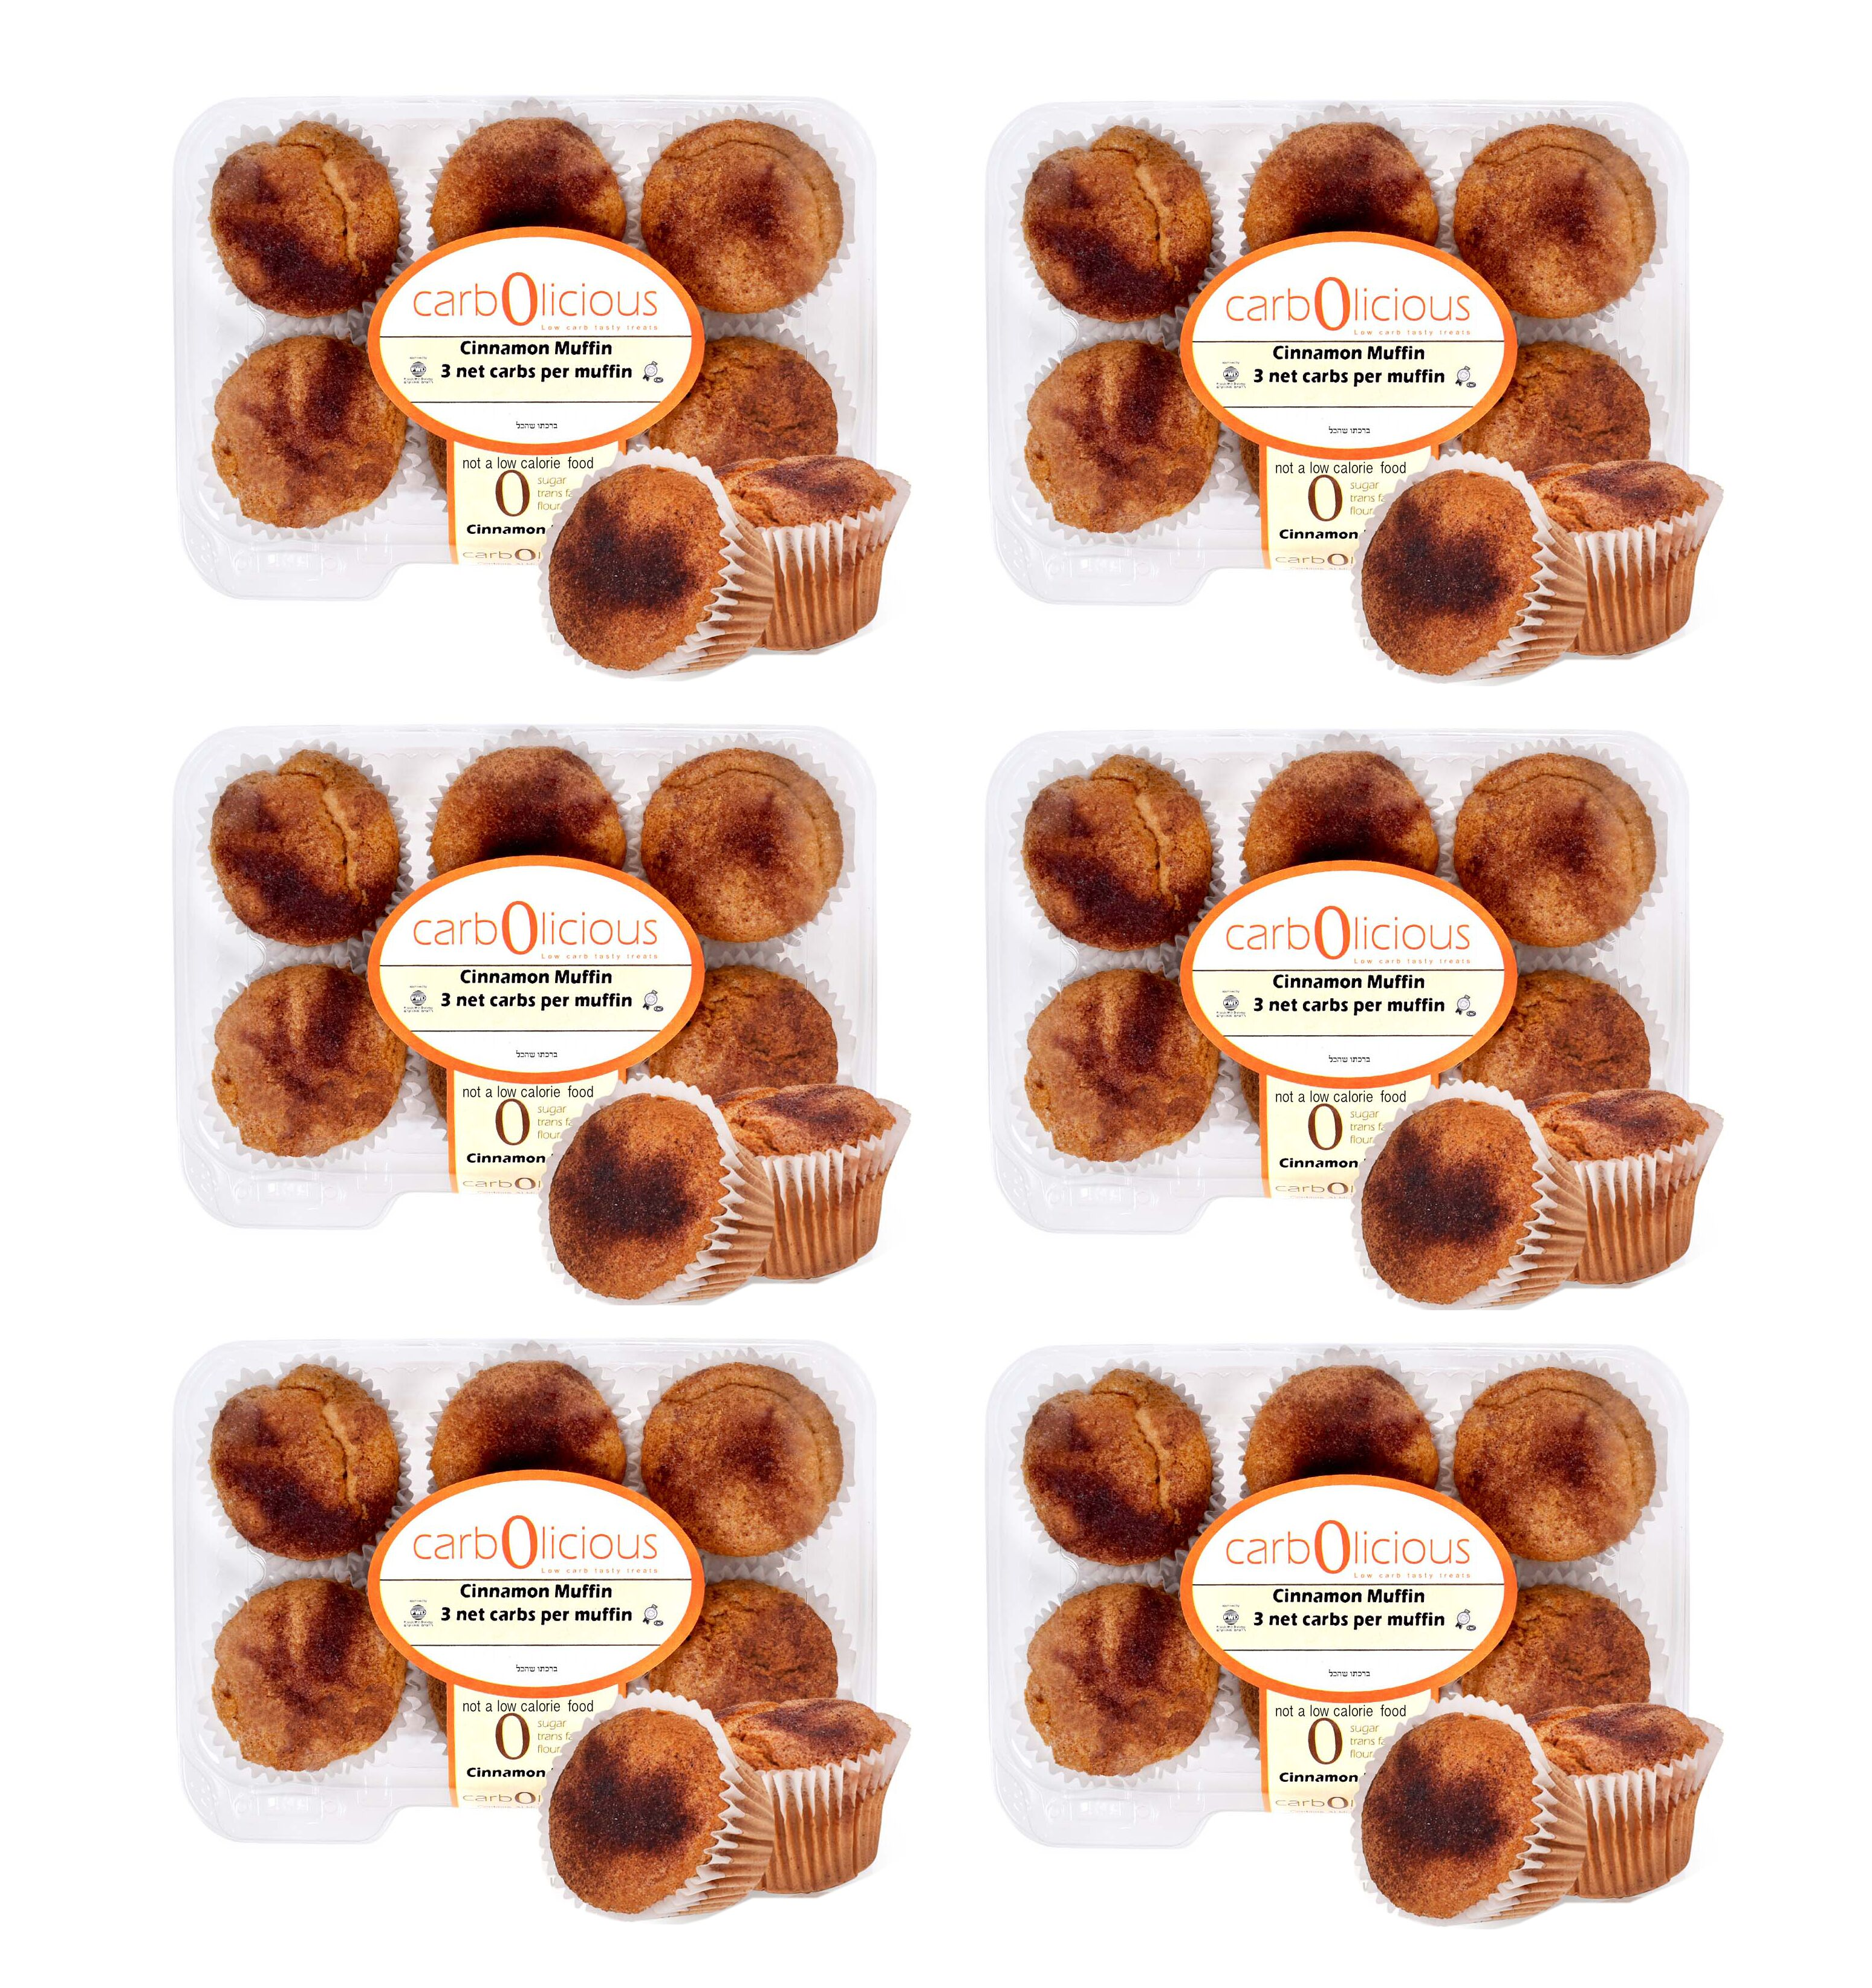 #Flavor_Cinnamon #Size_6-Pack (36 Muffins)